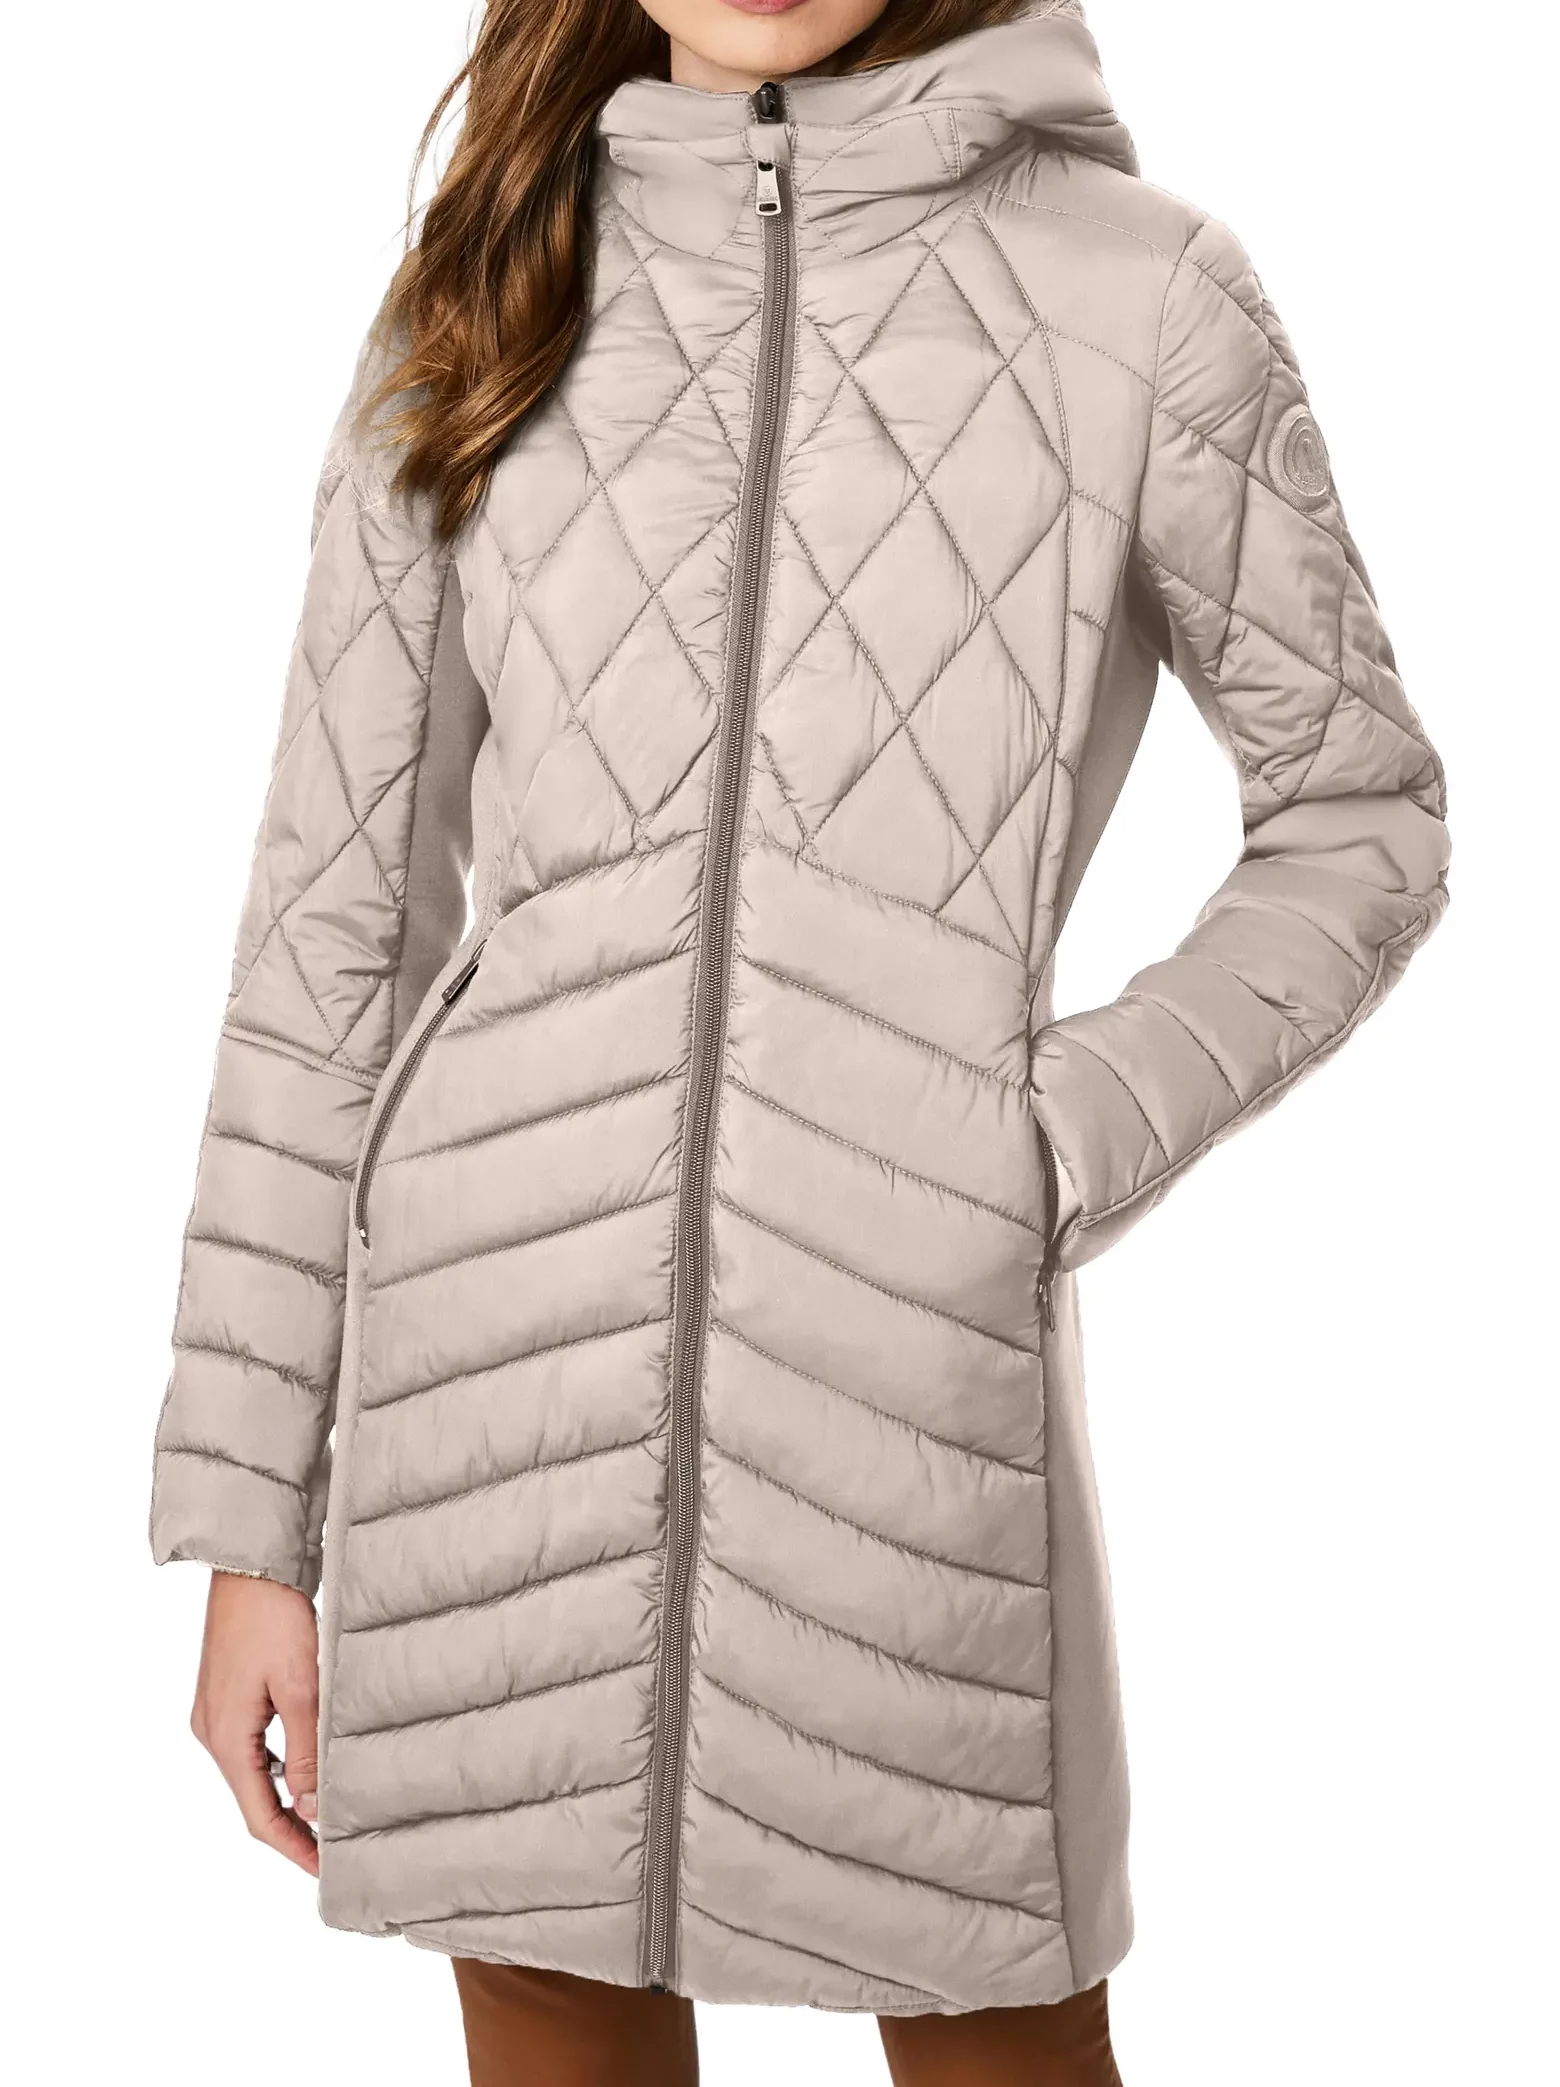 Winter Coats We Love That Are On Sale packable hooded jacket winter coats that are on sale great winter coat deals lightweight warm winter coat Nashville stylists share coats that are good for traveling